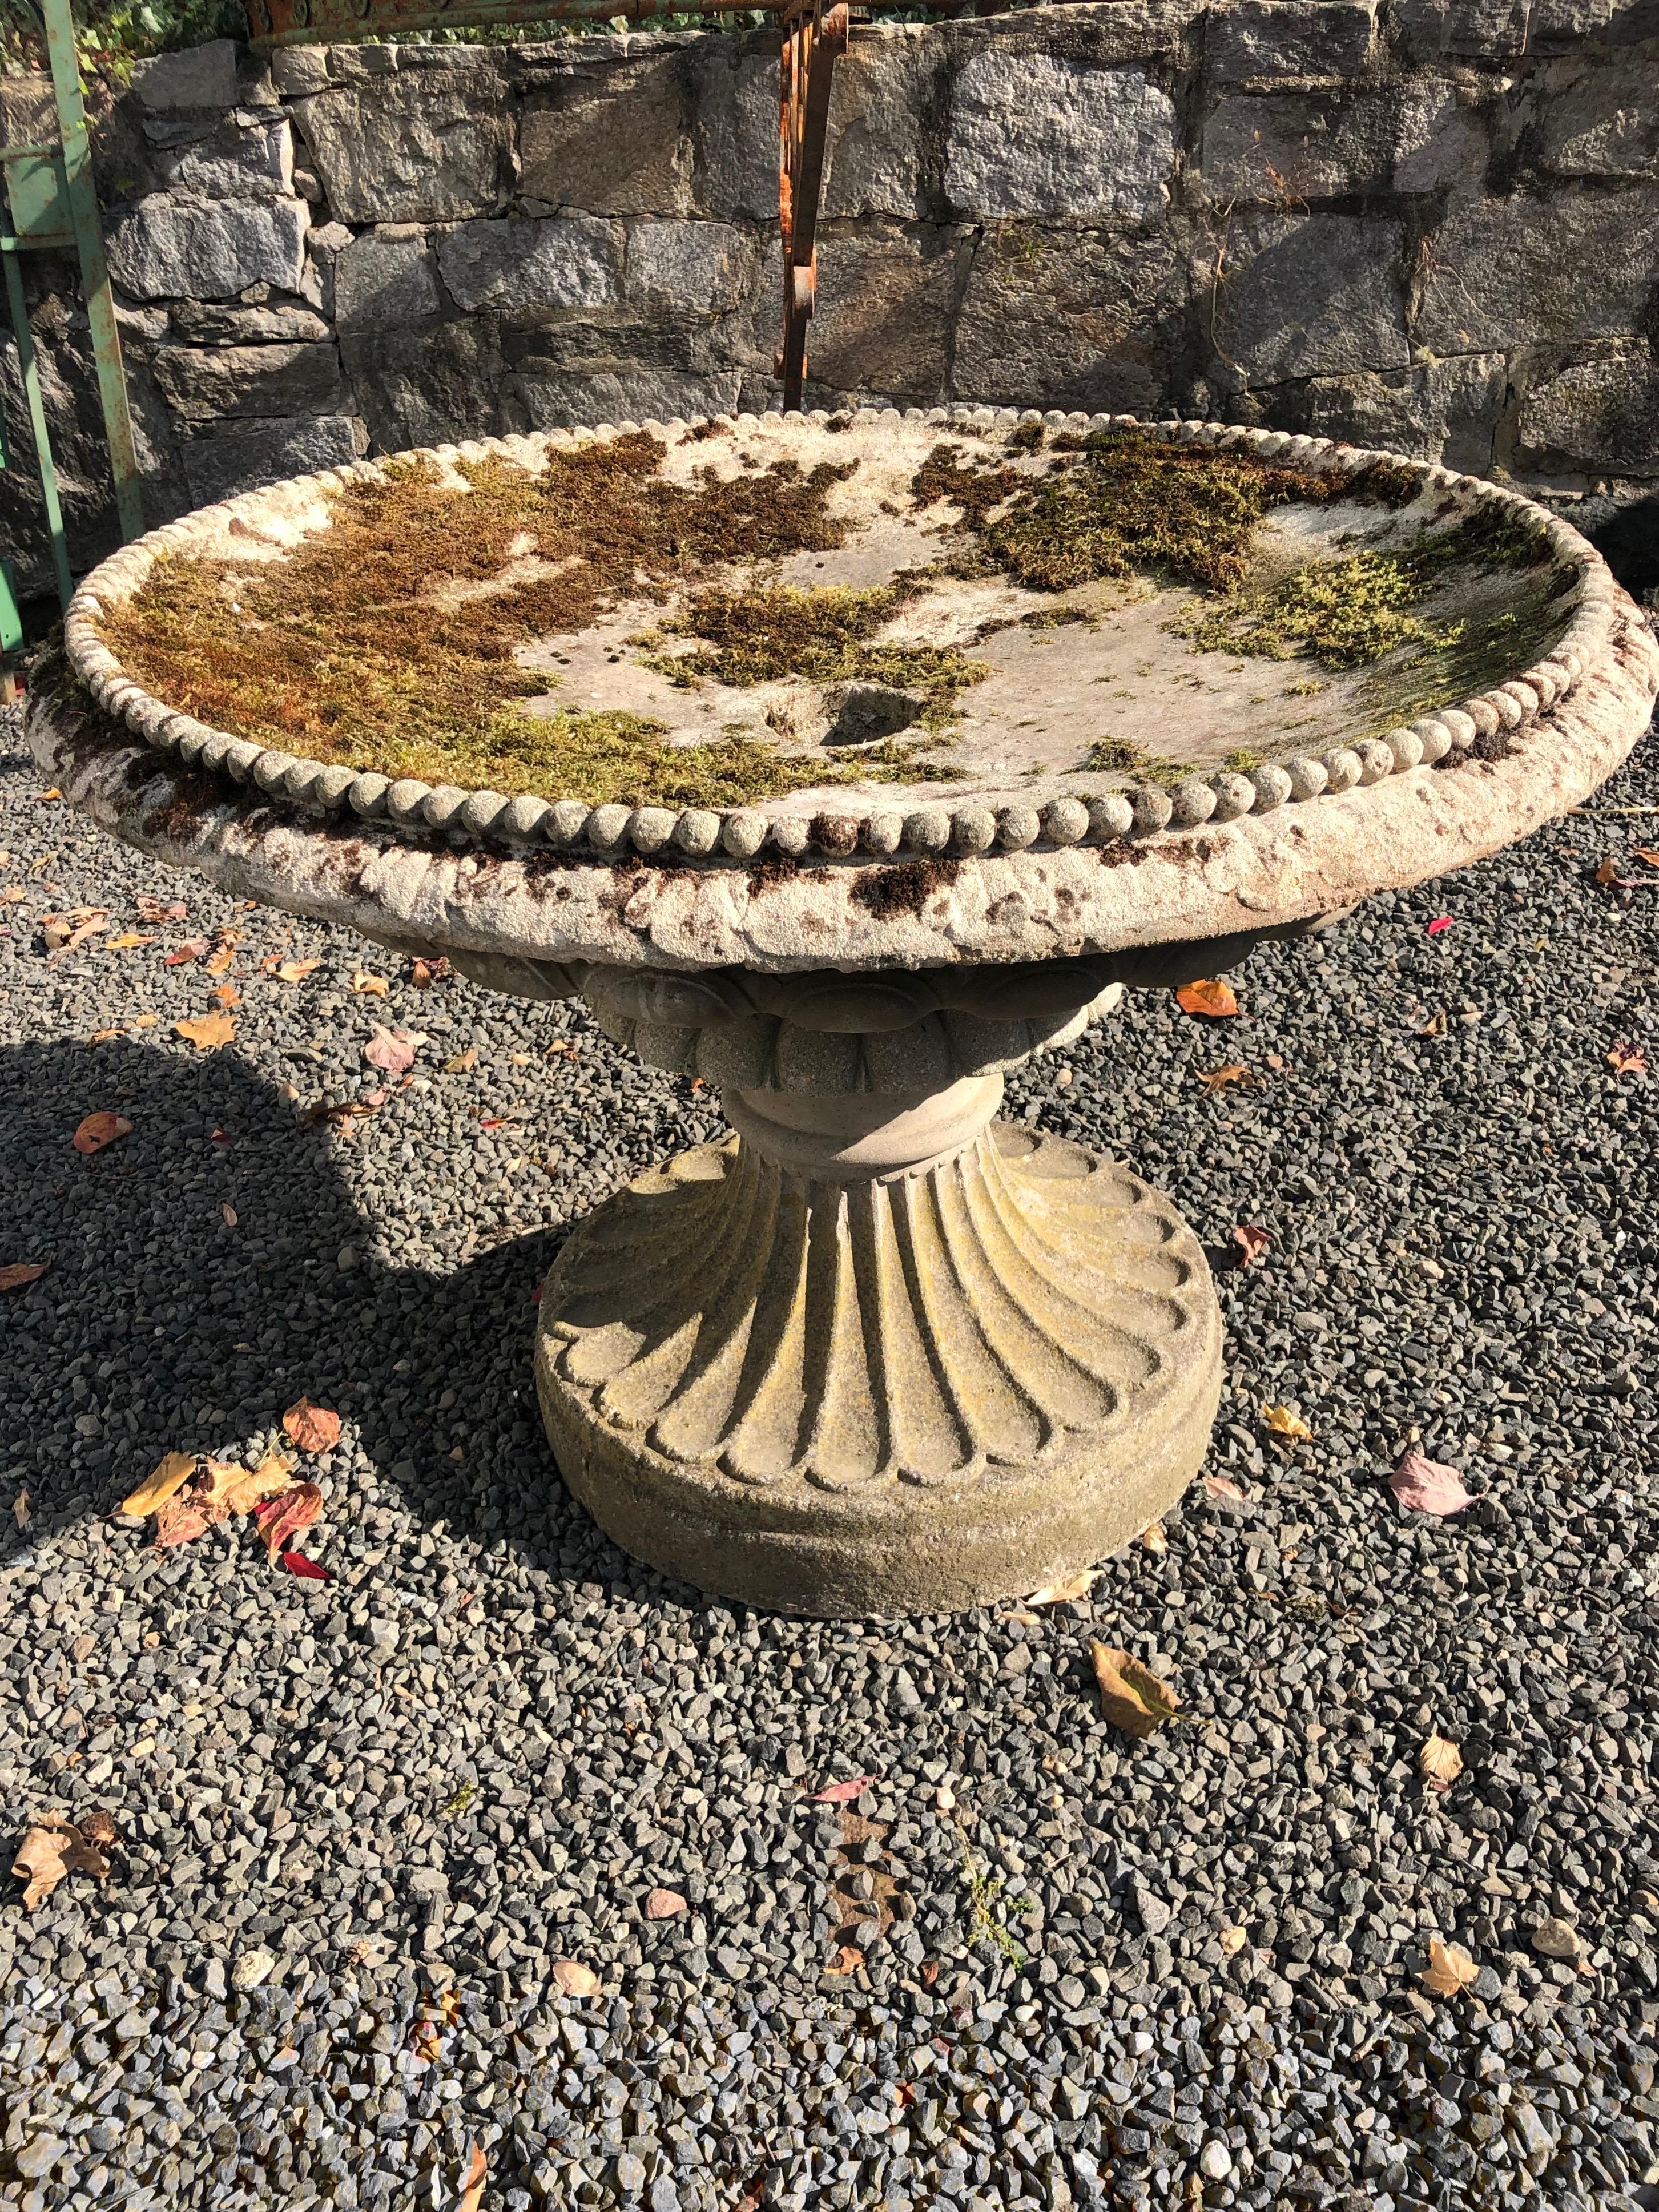 The superb detailing on this tazza-form urn, as well as its size and overall presence make this piece a stand-out. Architecturally-commanding, it would make the perfect centerpiece in your rose or herb garden, either plumbed as a fountain (there is